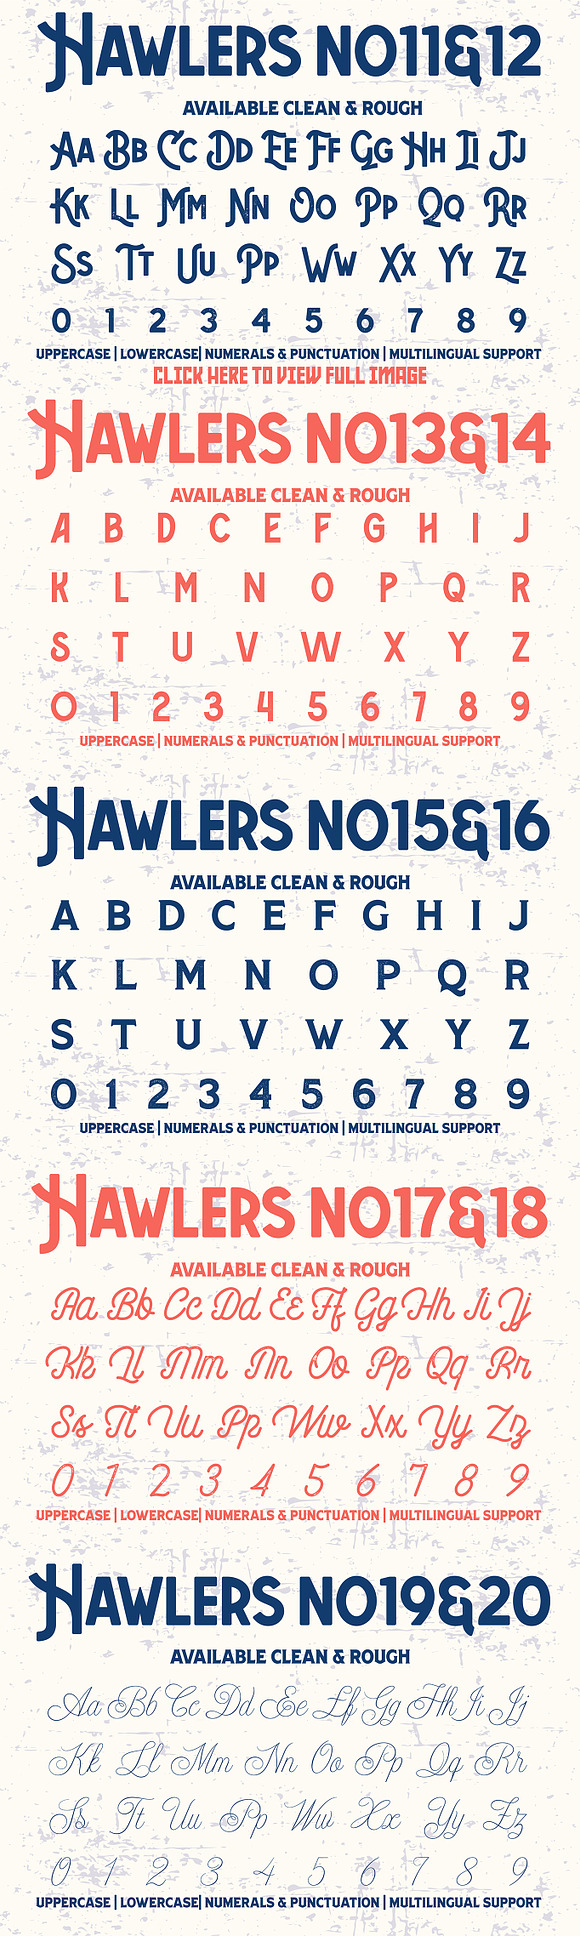 Hawlers Font Family + Extras in Stamp Fonts - product preview 8